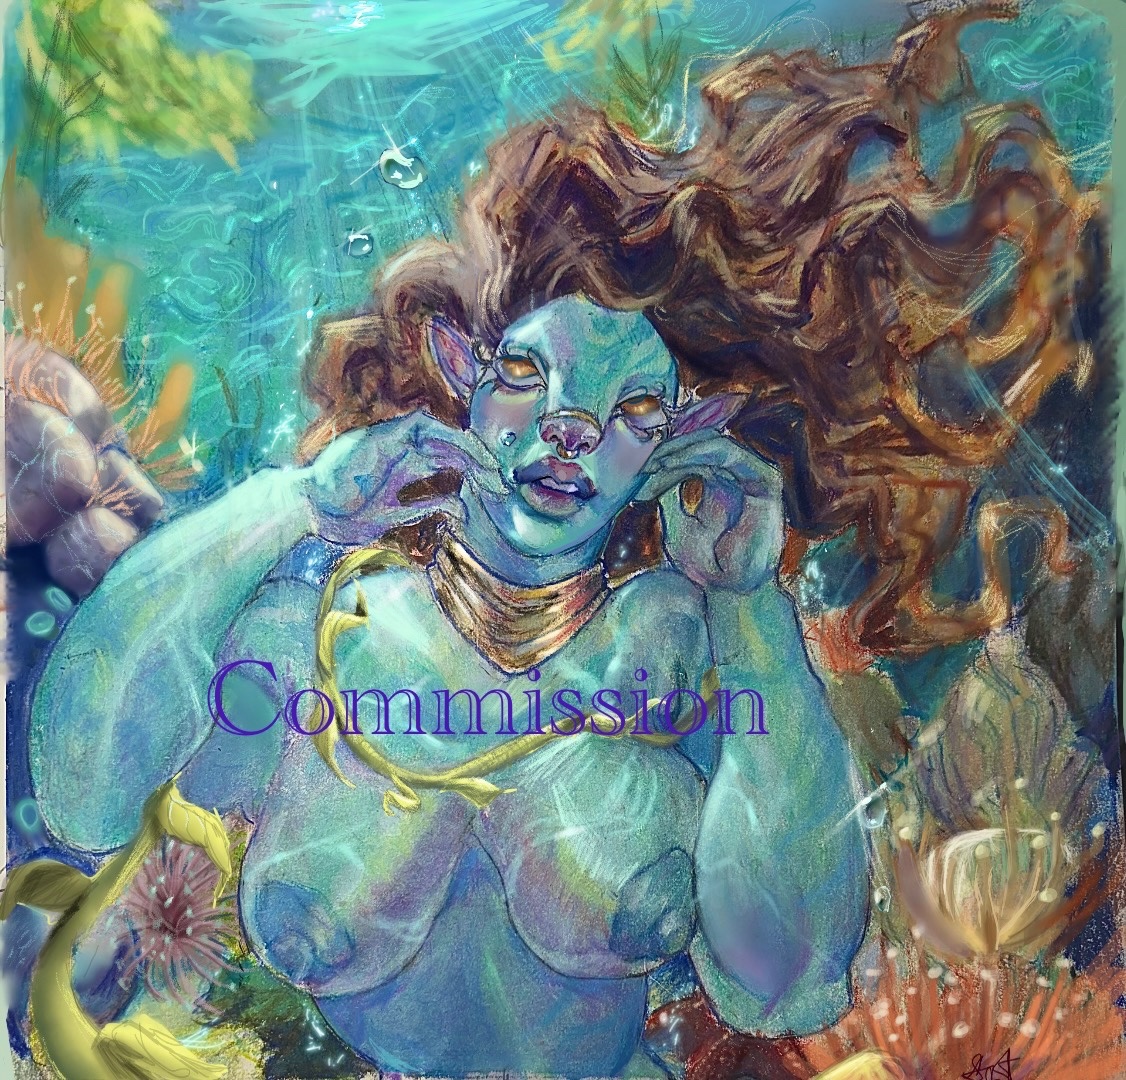 First time drawing an underwater background, how’d I do?
#Commission #art #avatarthewayofwater